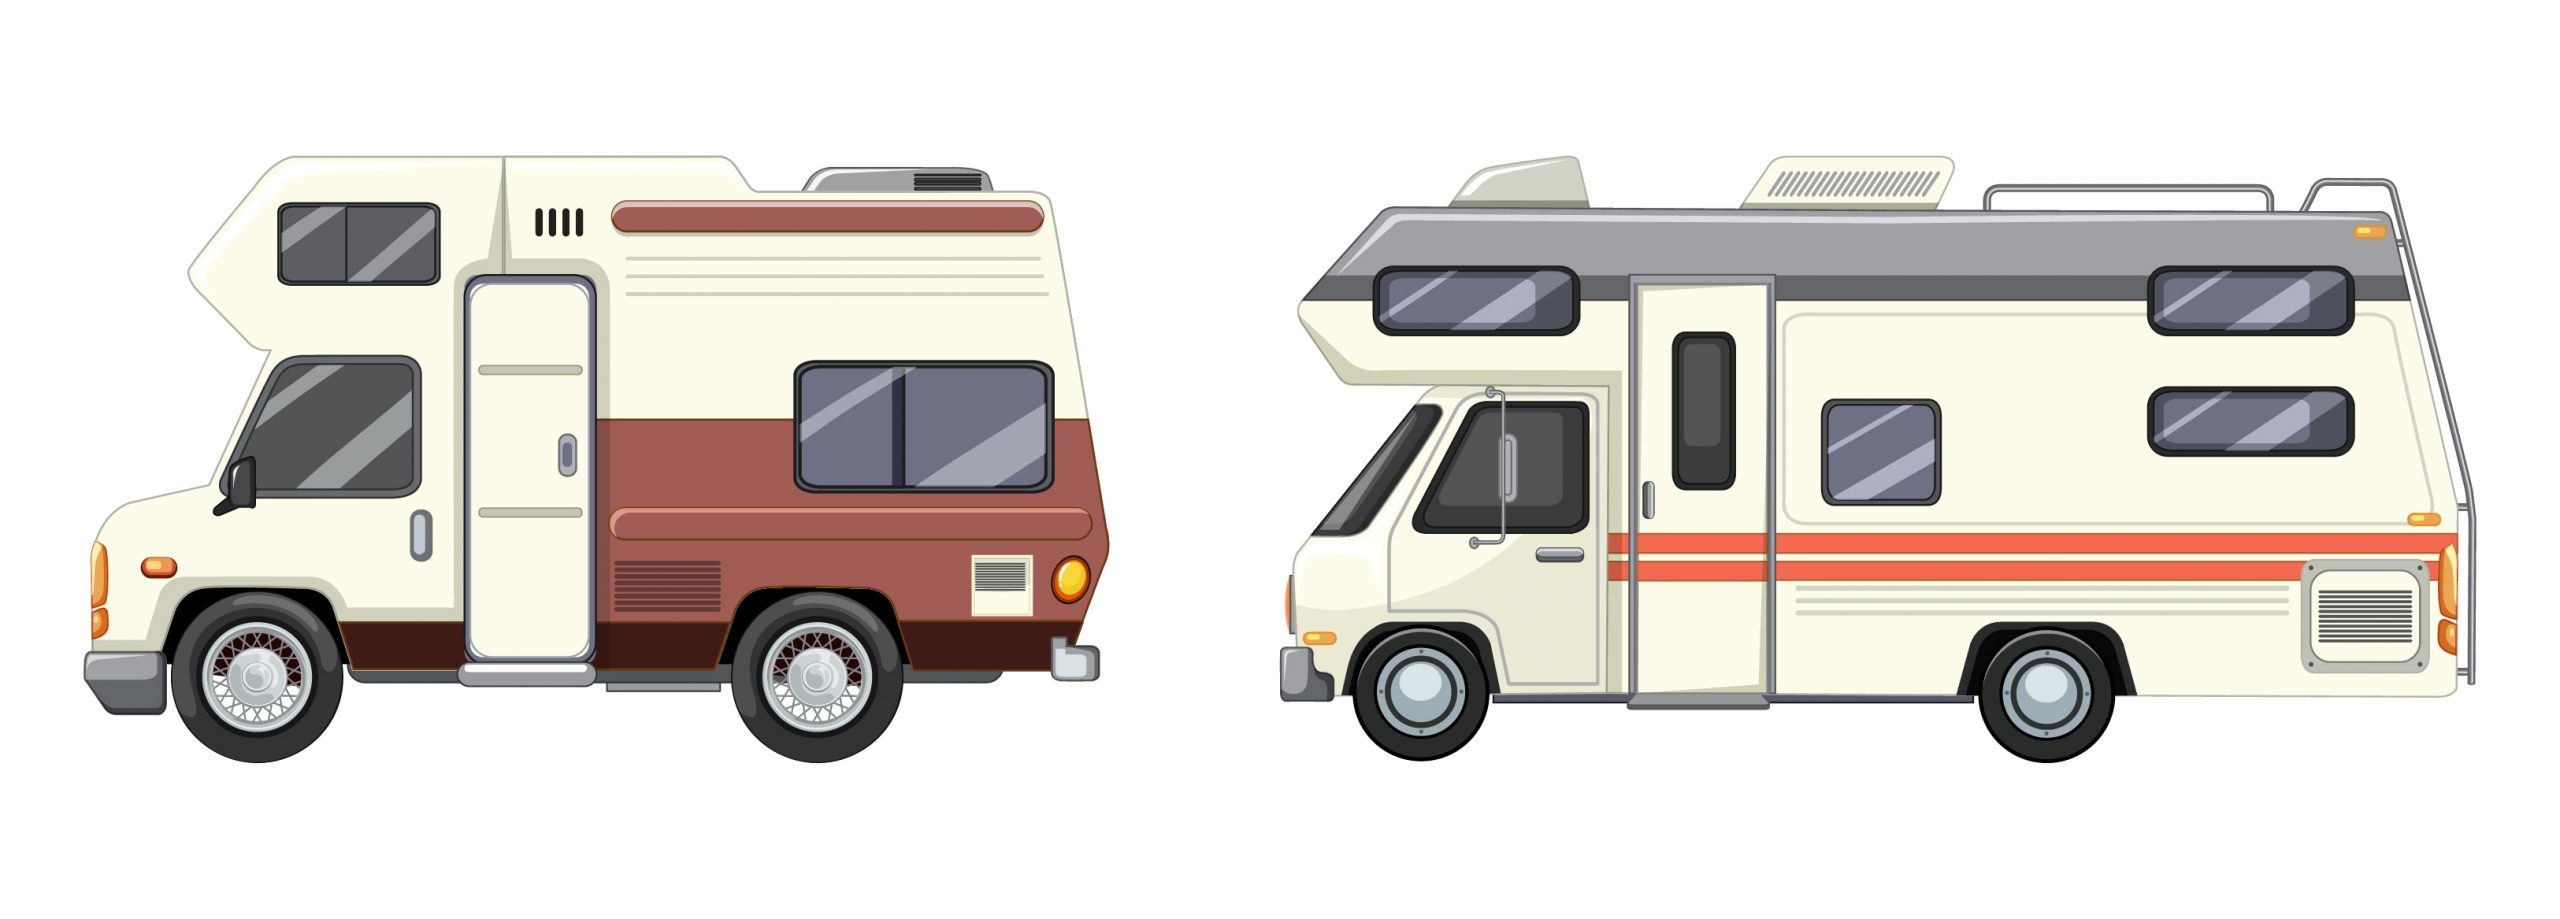 Towing an RV / Motorhome - Weights